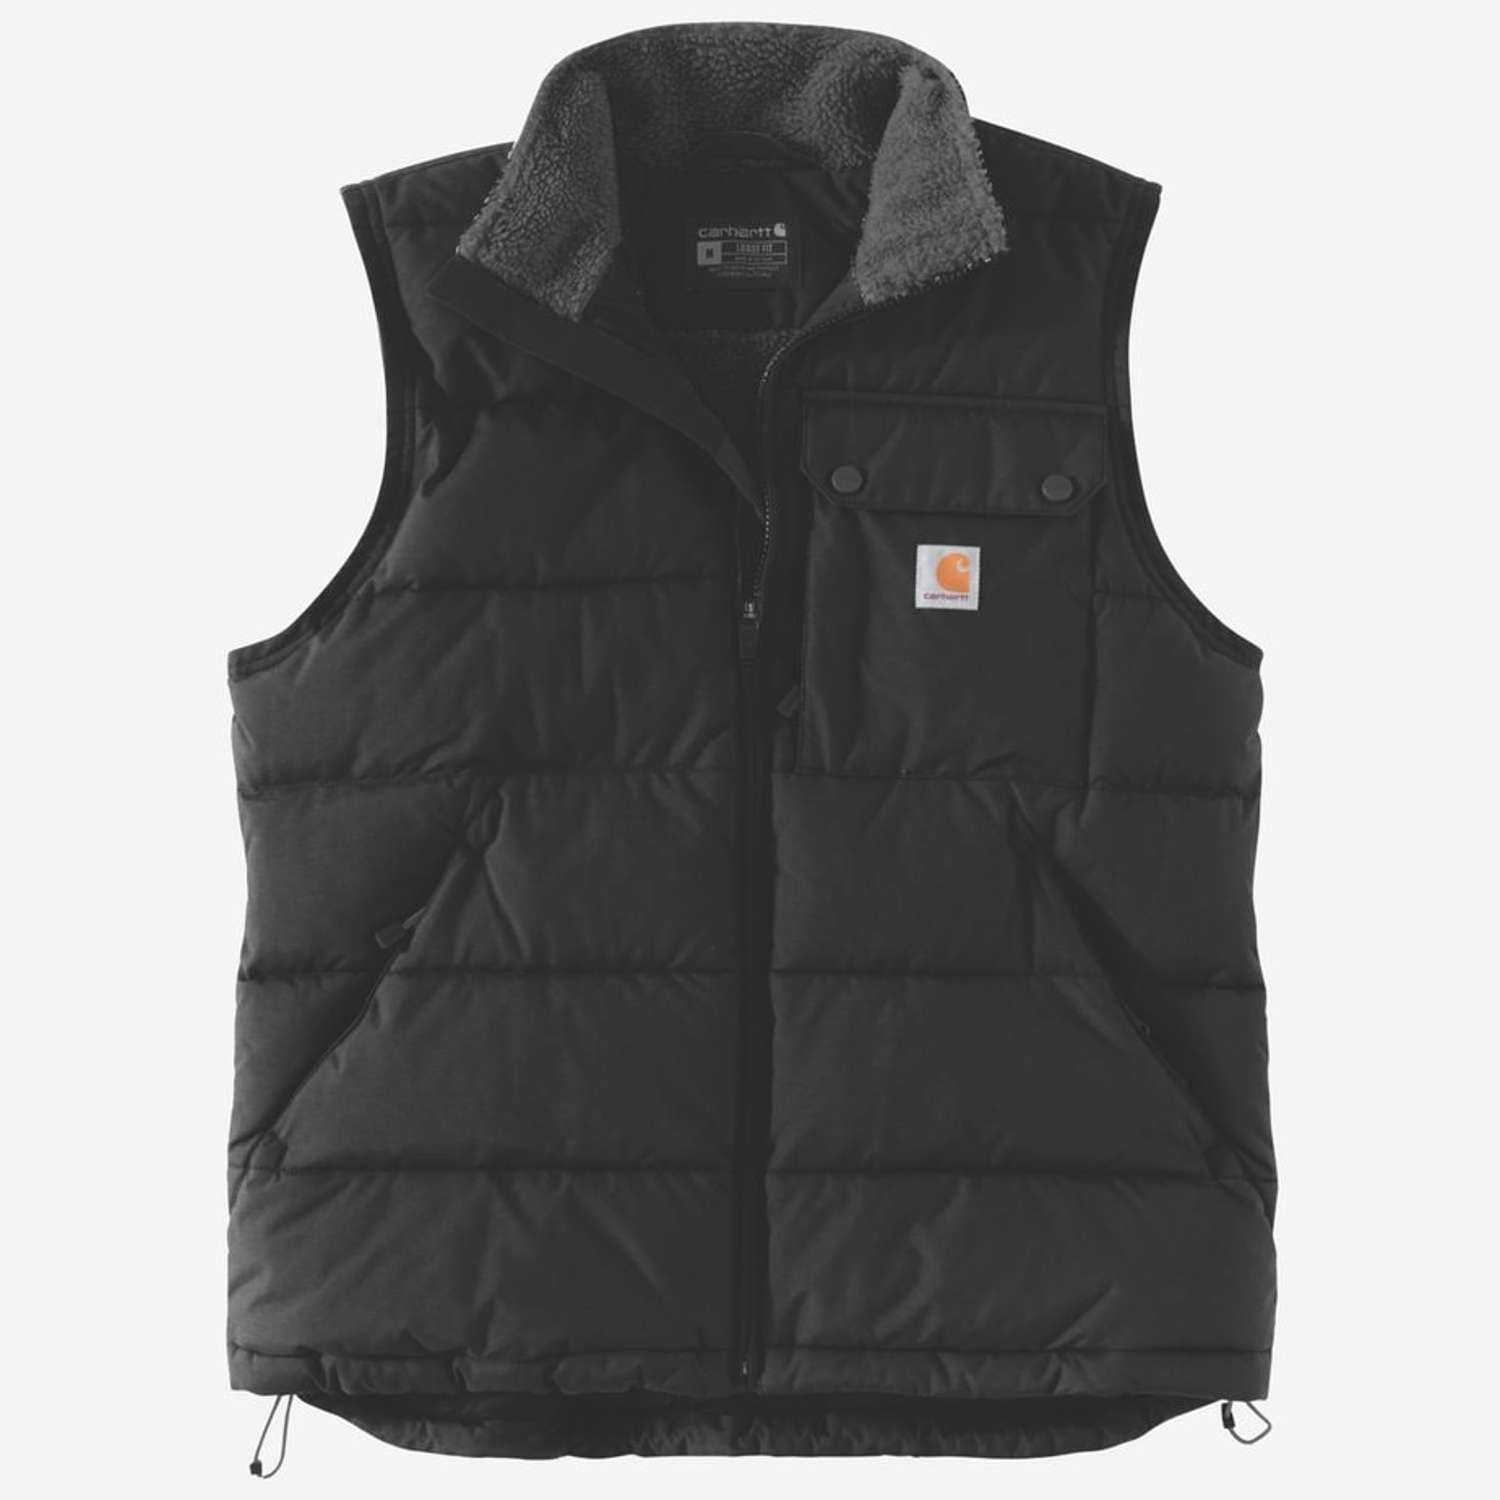 Se CARHARTT Loose Fit Midweight Insulated Vest BLACK - XL hos Toolster.dk